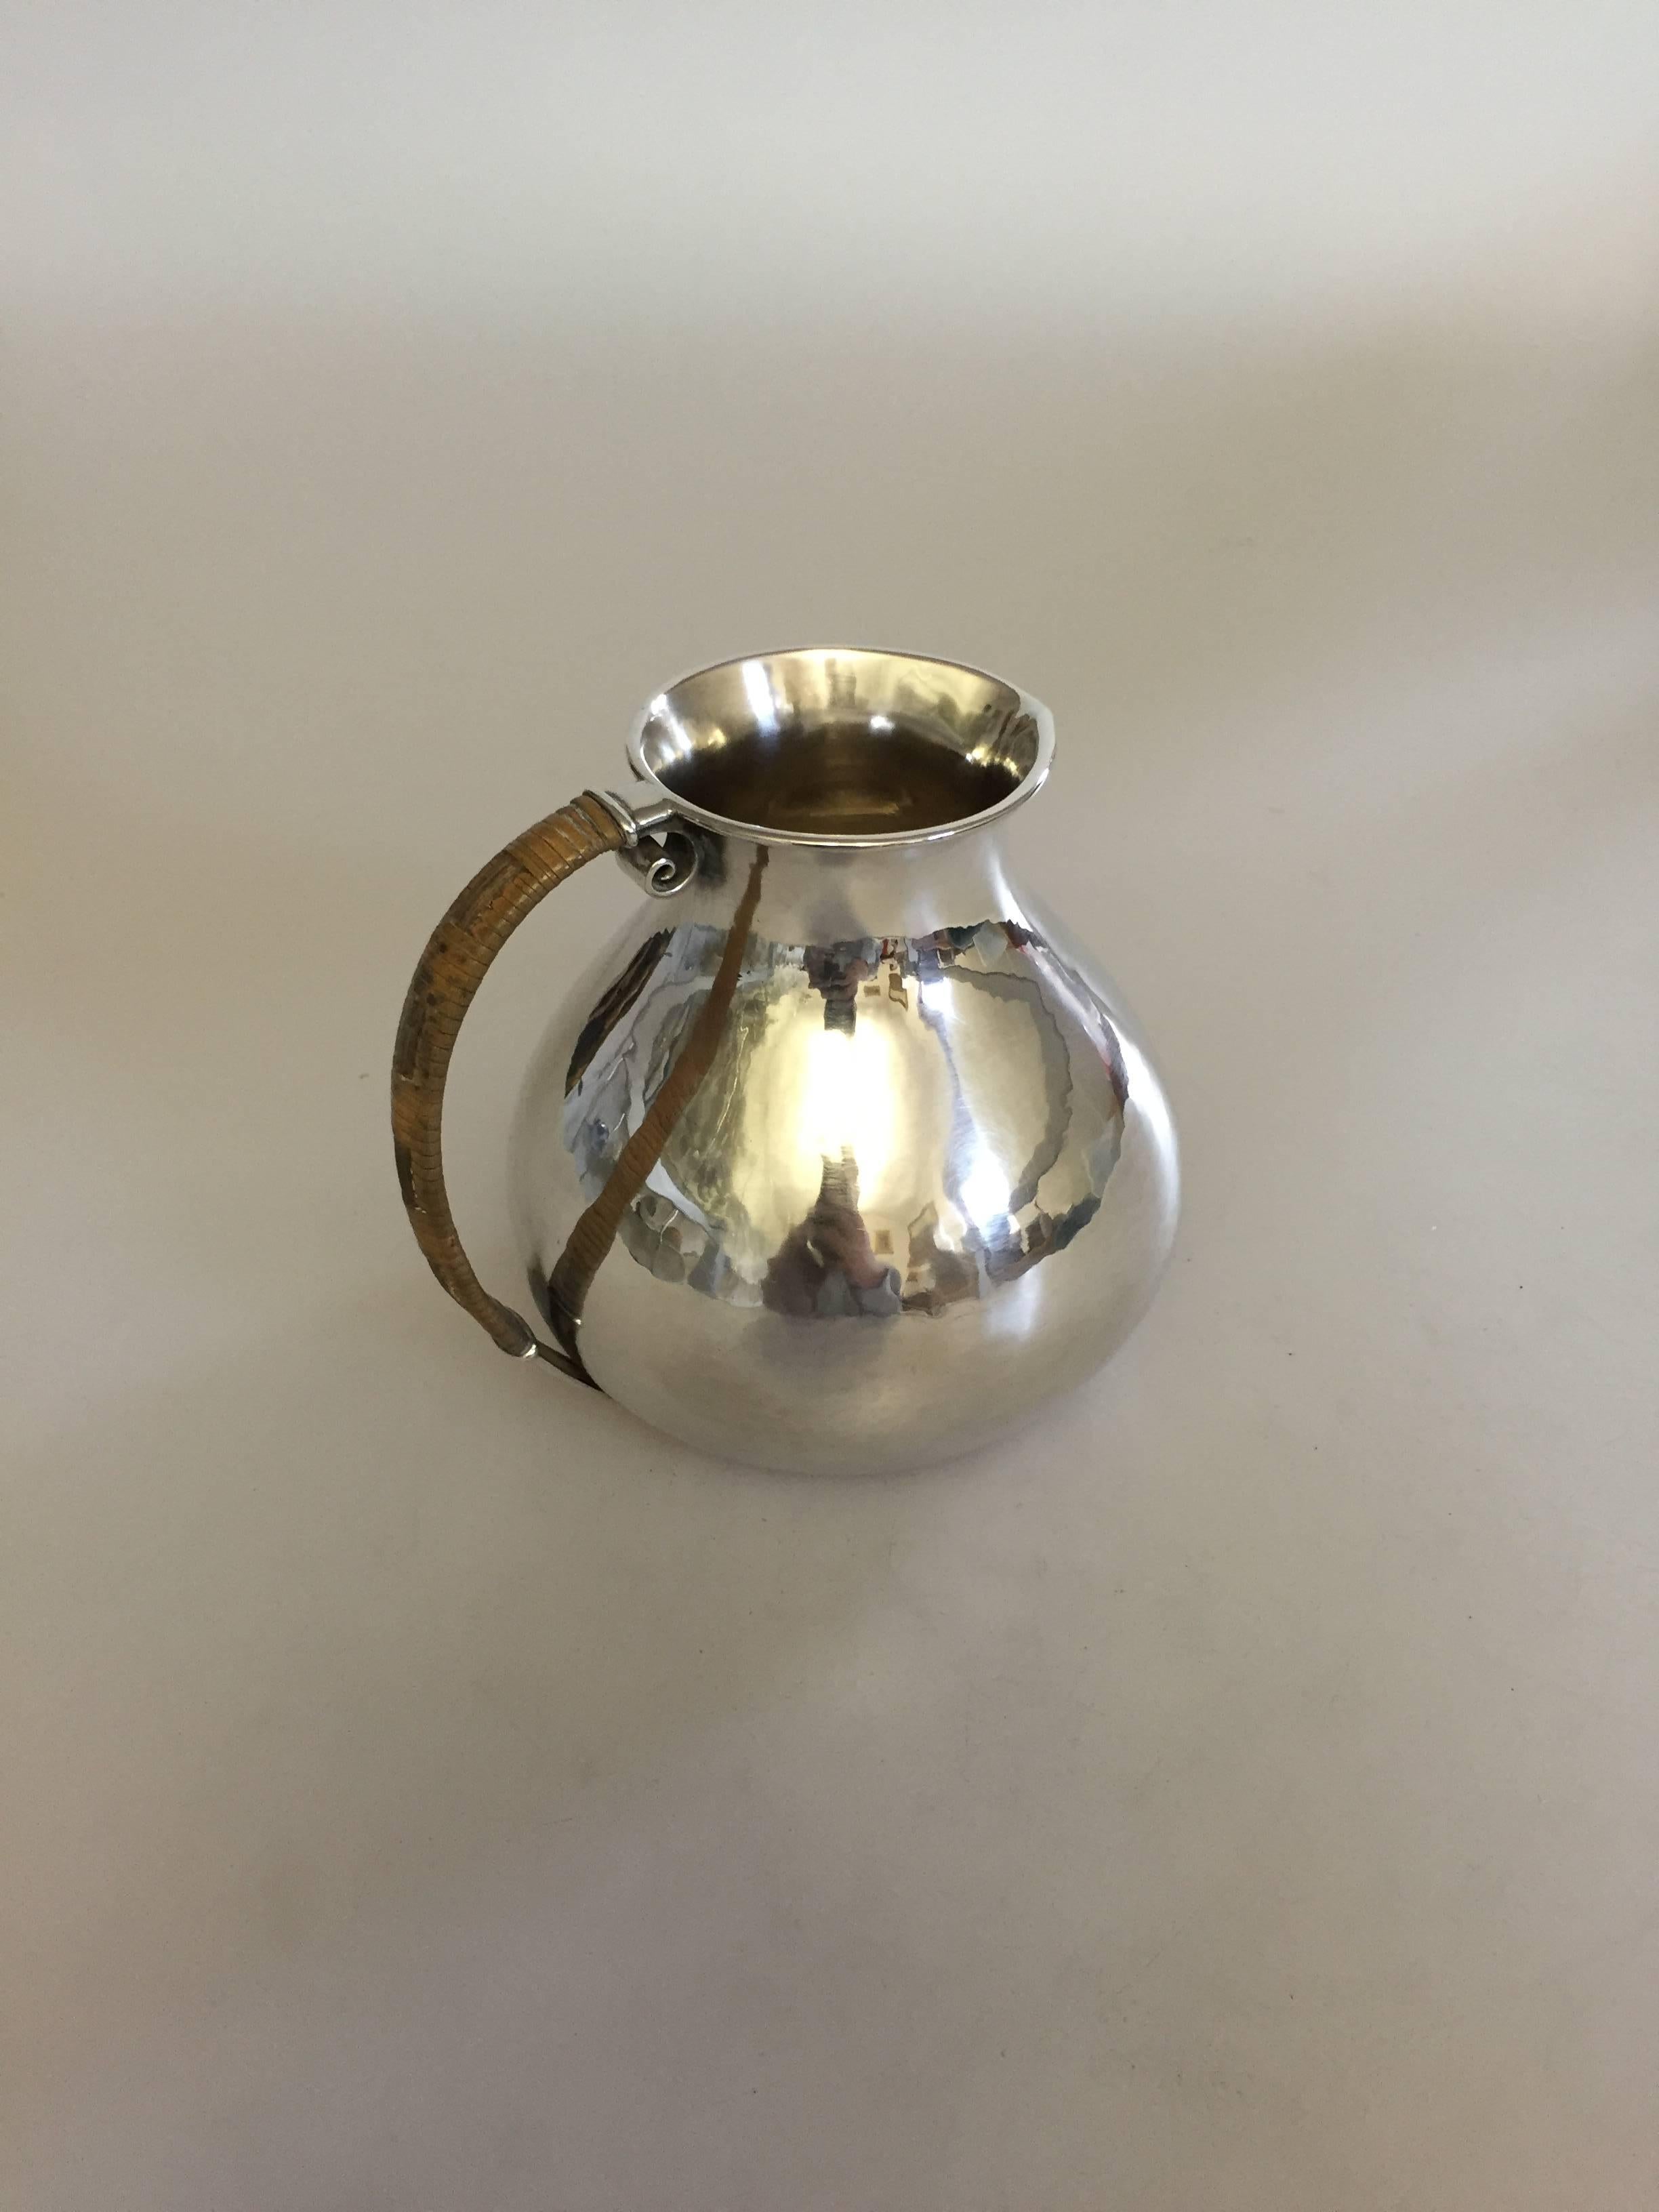 Hans Hansen sterling silver pitcher by Karl Gustav Hansen from 1932. The pitcher measures 10.5 cm and is in good condition.

Hans Hansen (1884-1940) was a Danish silversmithy. He opened his own smithy and shop in Kolding, Denmark in 1906. Starting